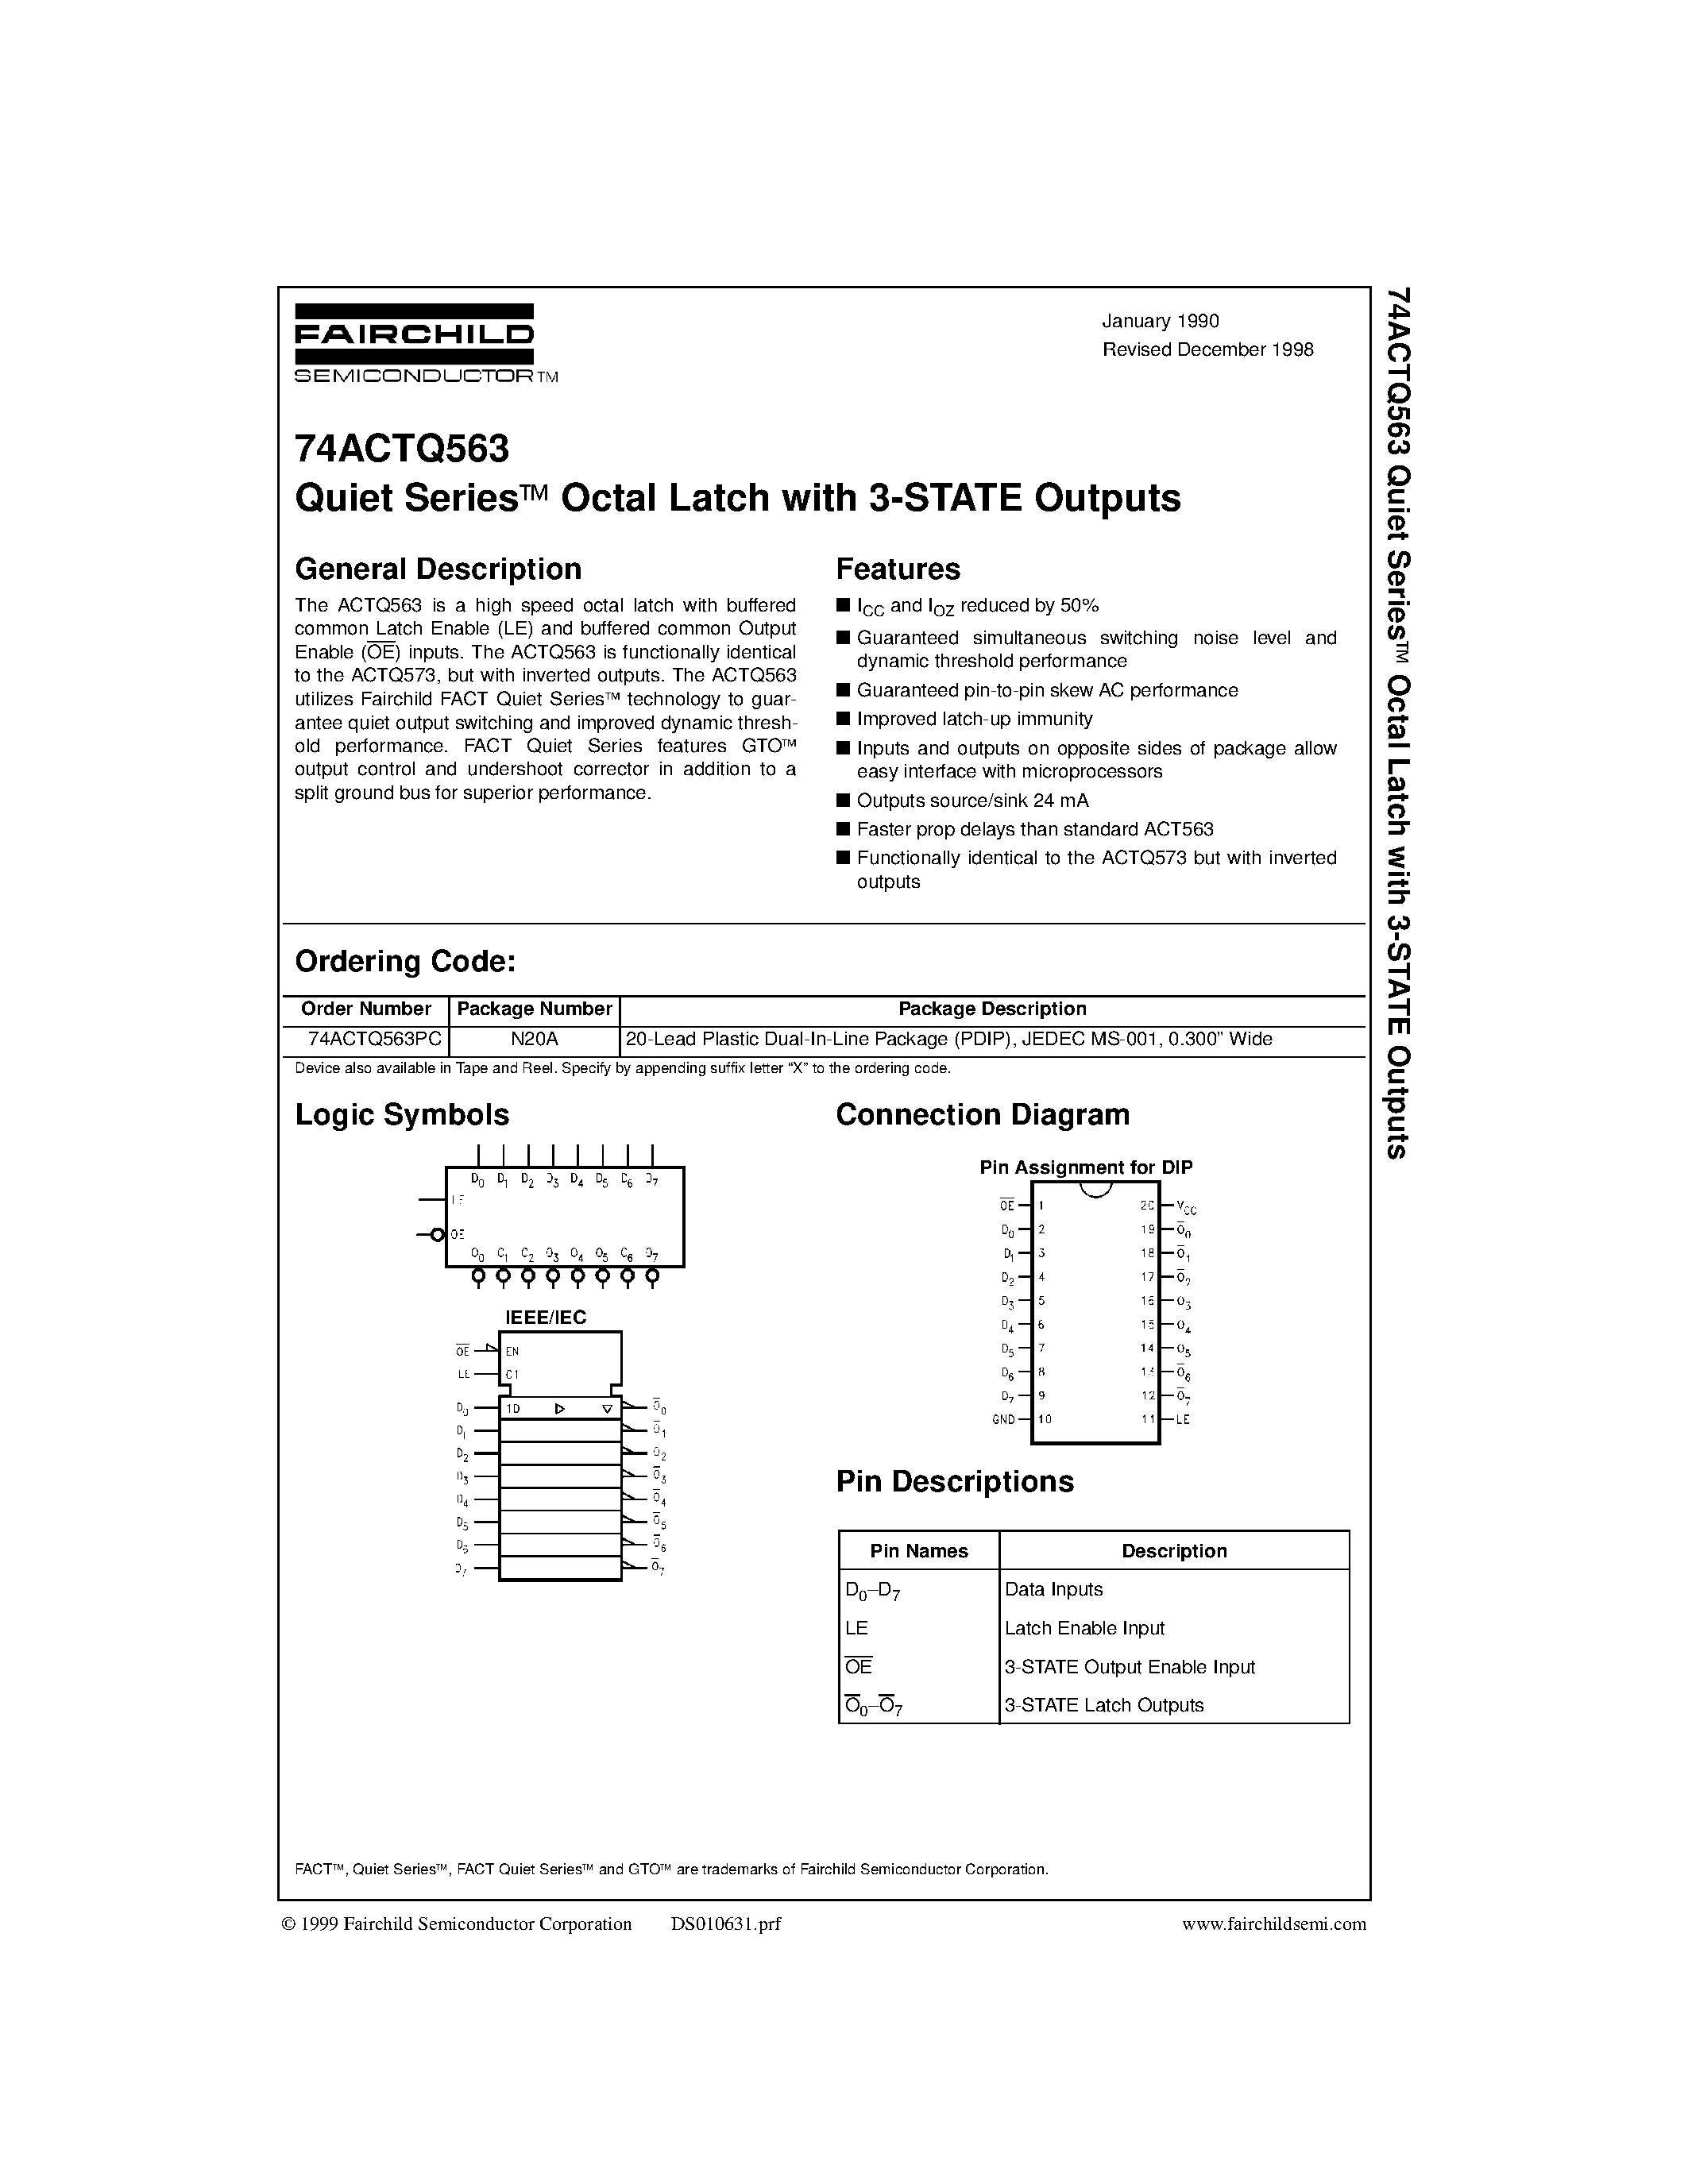 Datasheet 74ACTQ563 - Quiet Series Octal Latch with 3-STATE Outputs page 1